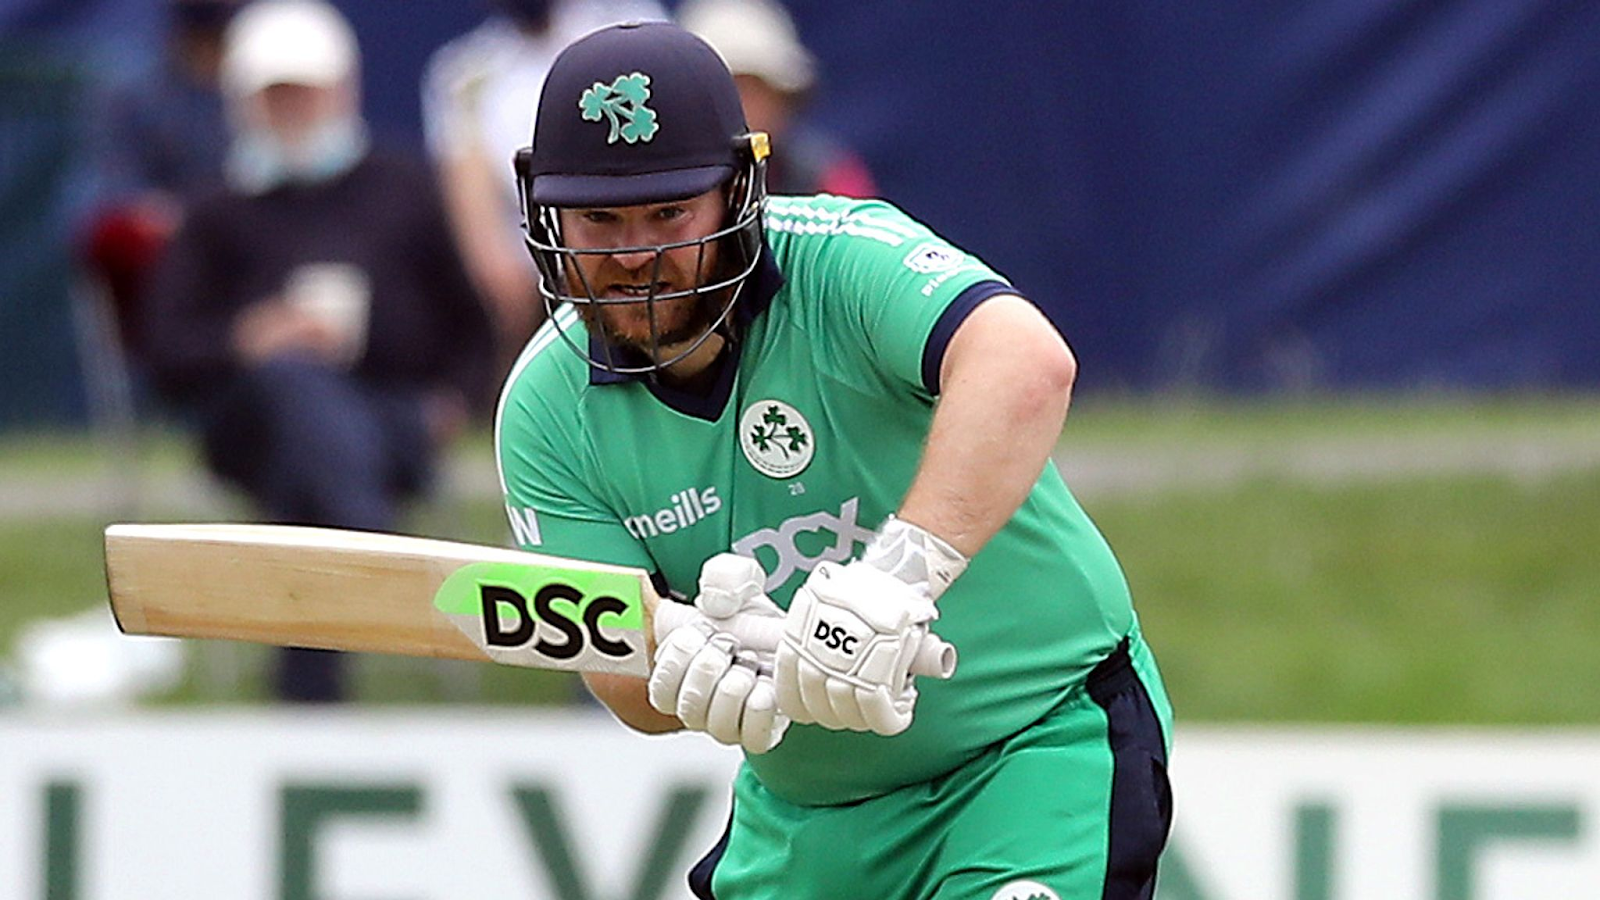 Paul stirling - Fifth most Runs in T20 Career